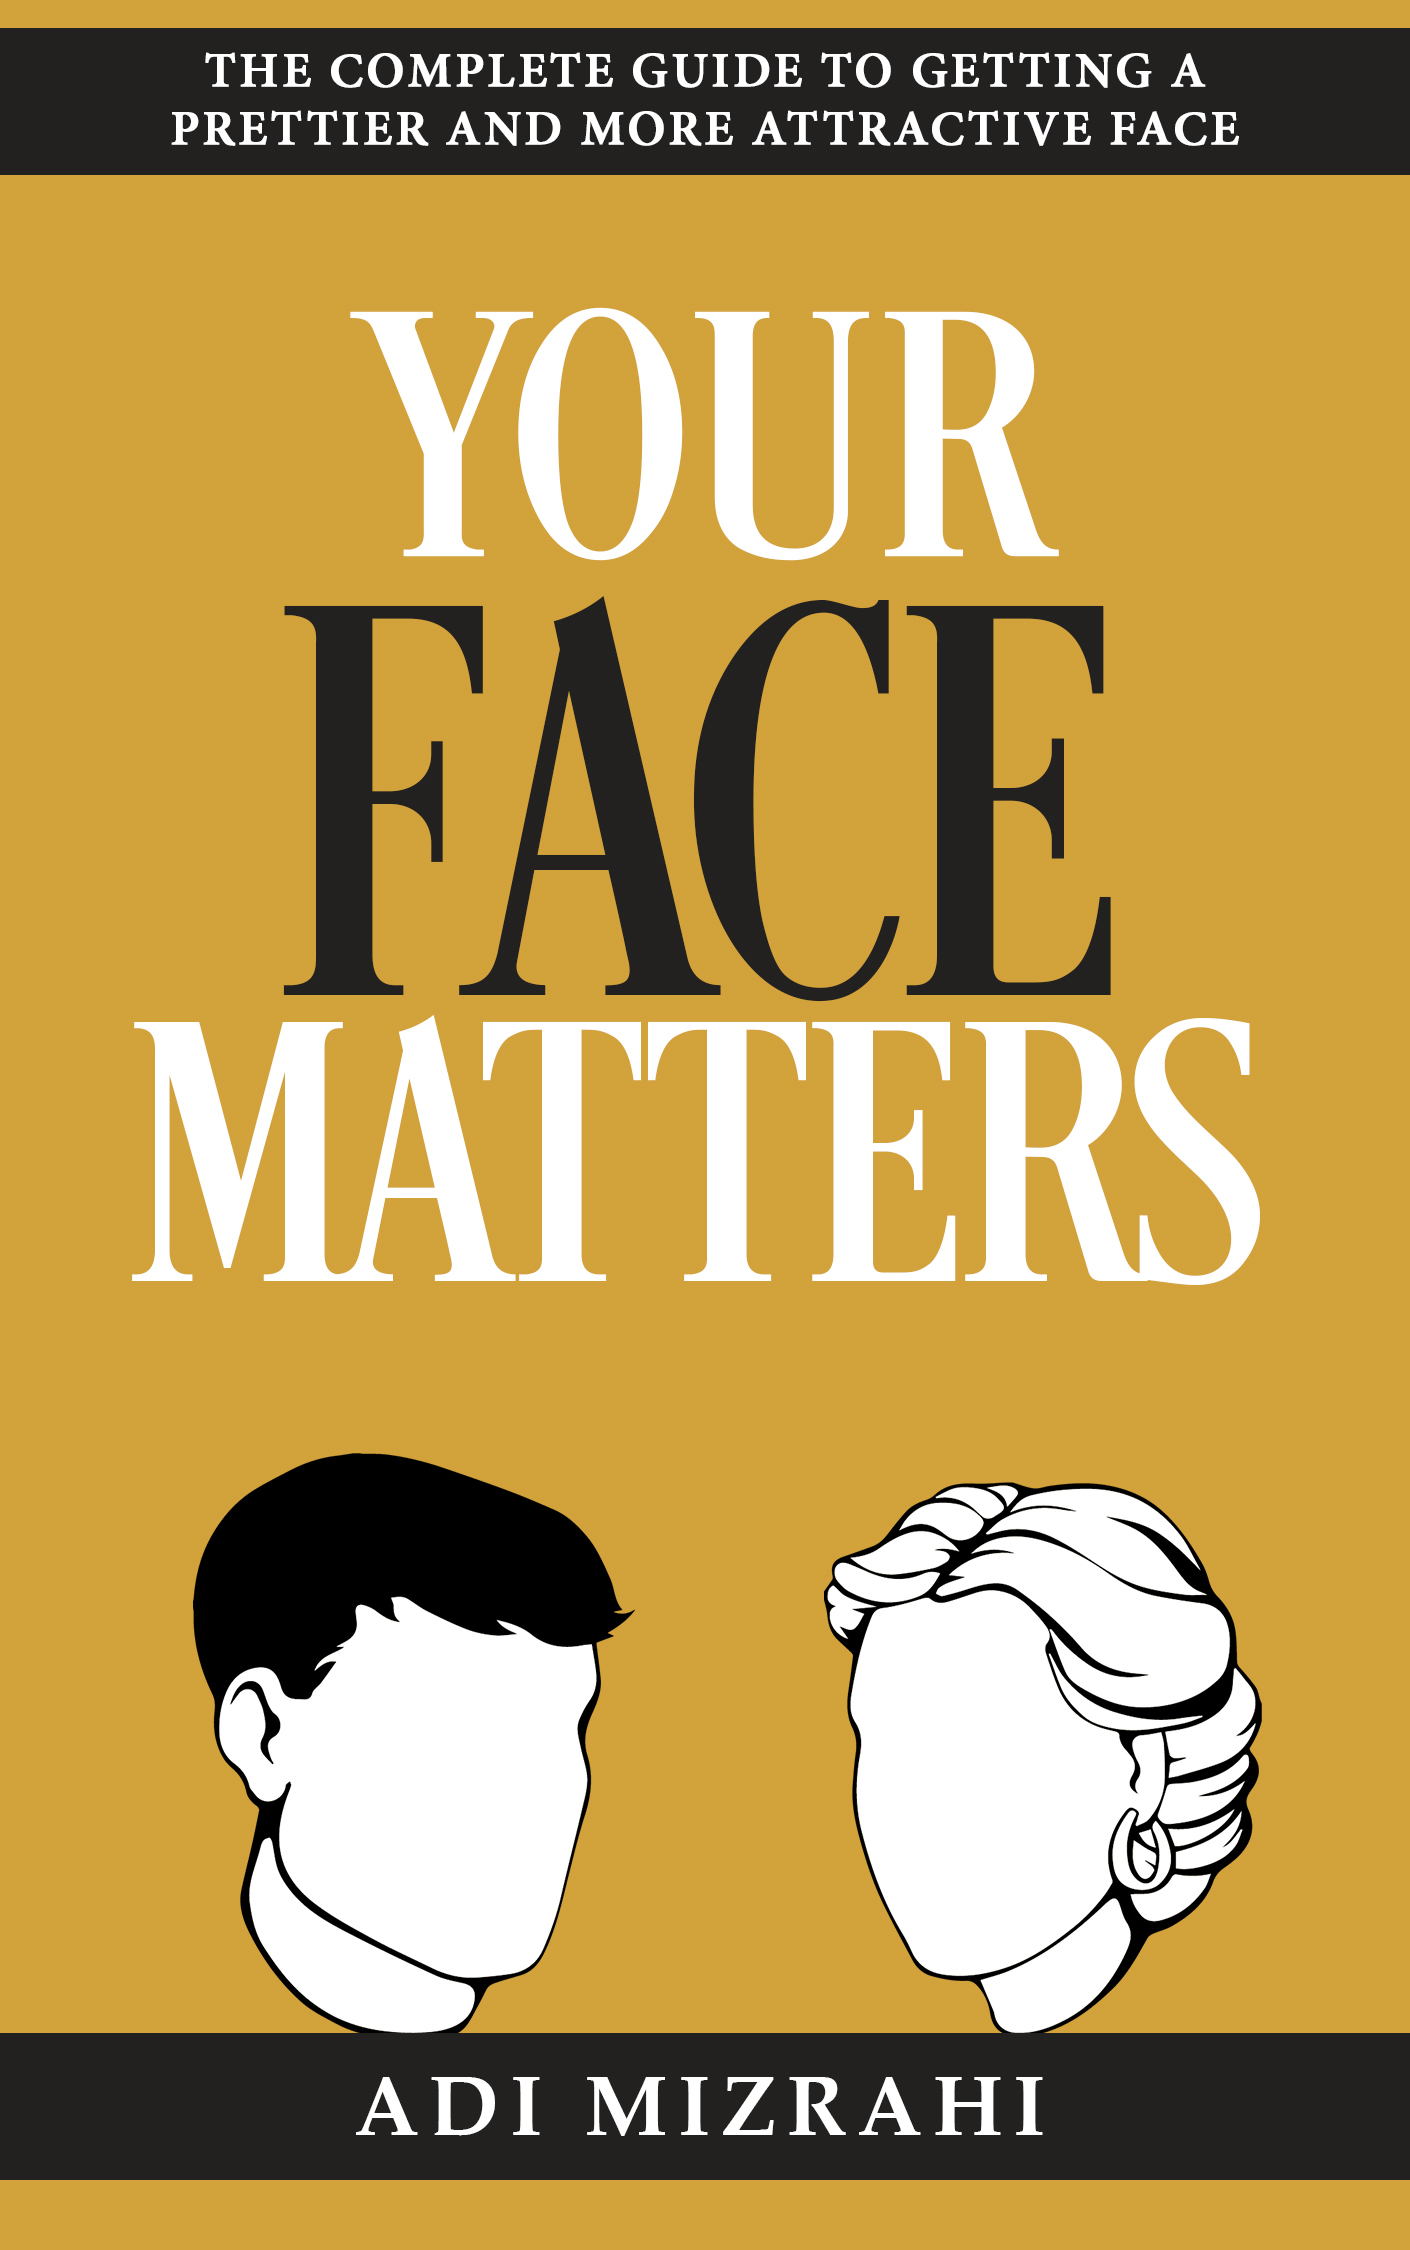 FREE: Your Face Matters: The Complete Guide to Getting a Prettier and More Attractive Face by Adi Mizrahi